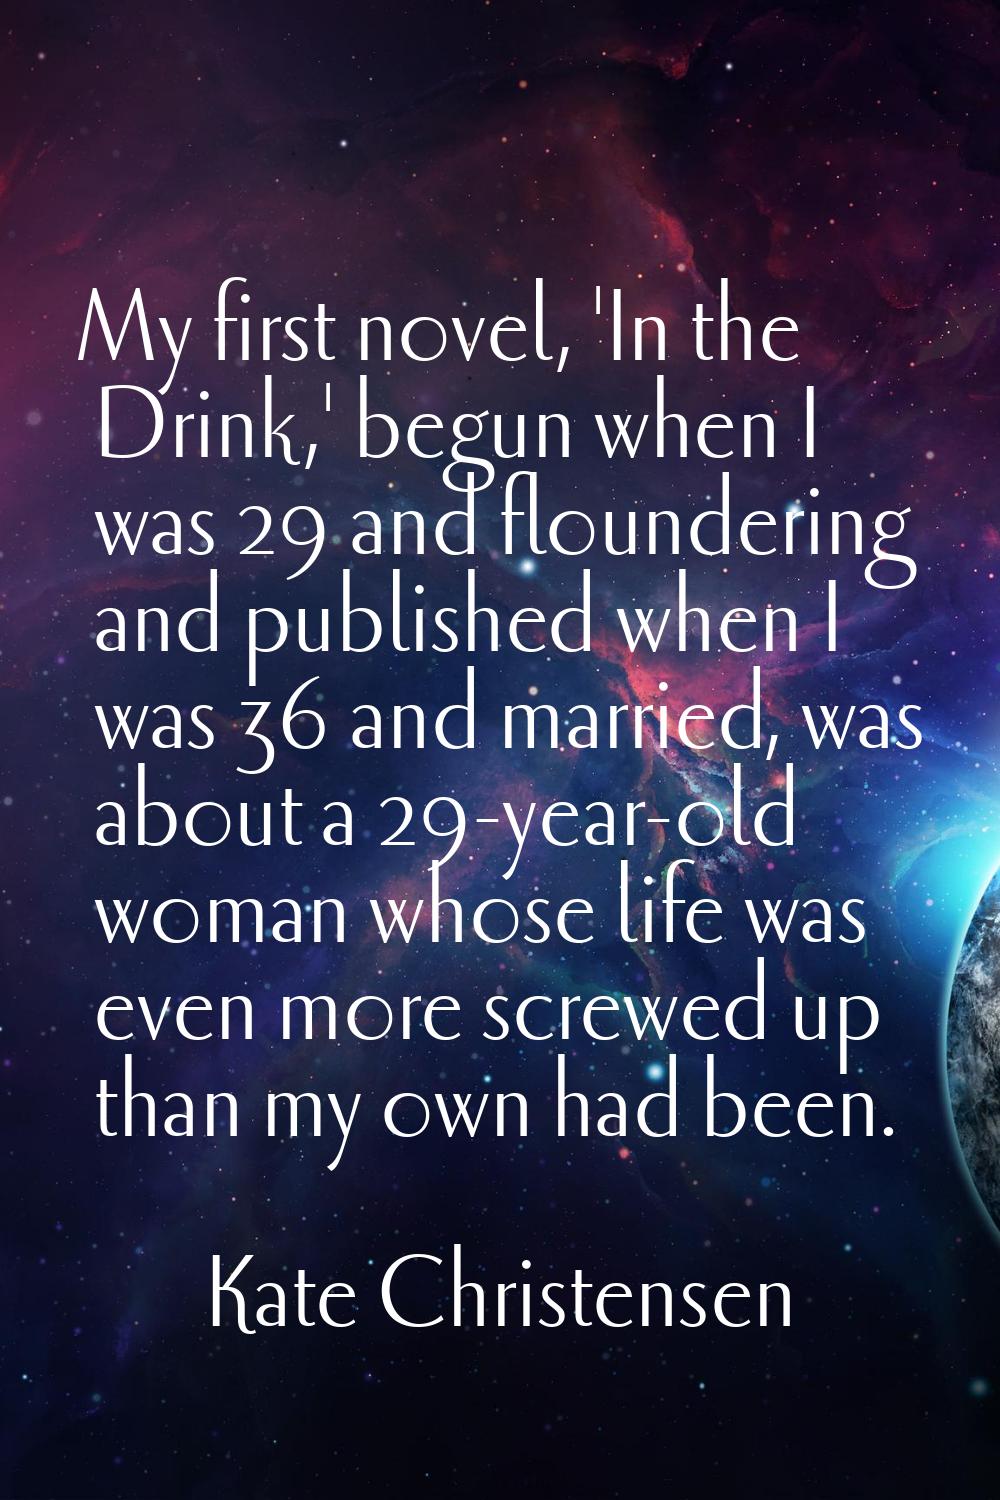 My first novel, 'In the Drink,' begun when I was 29 and floundering and published when I was 36 and